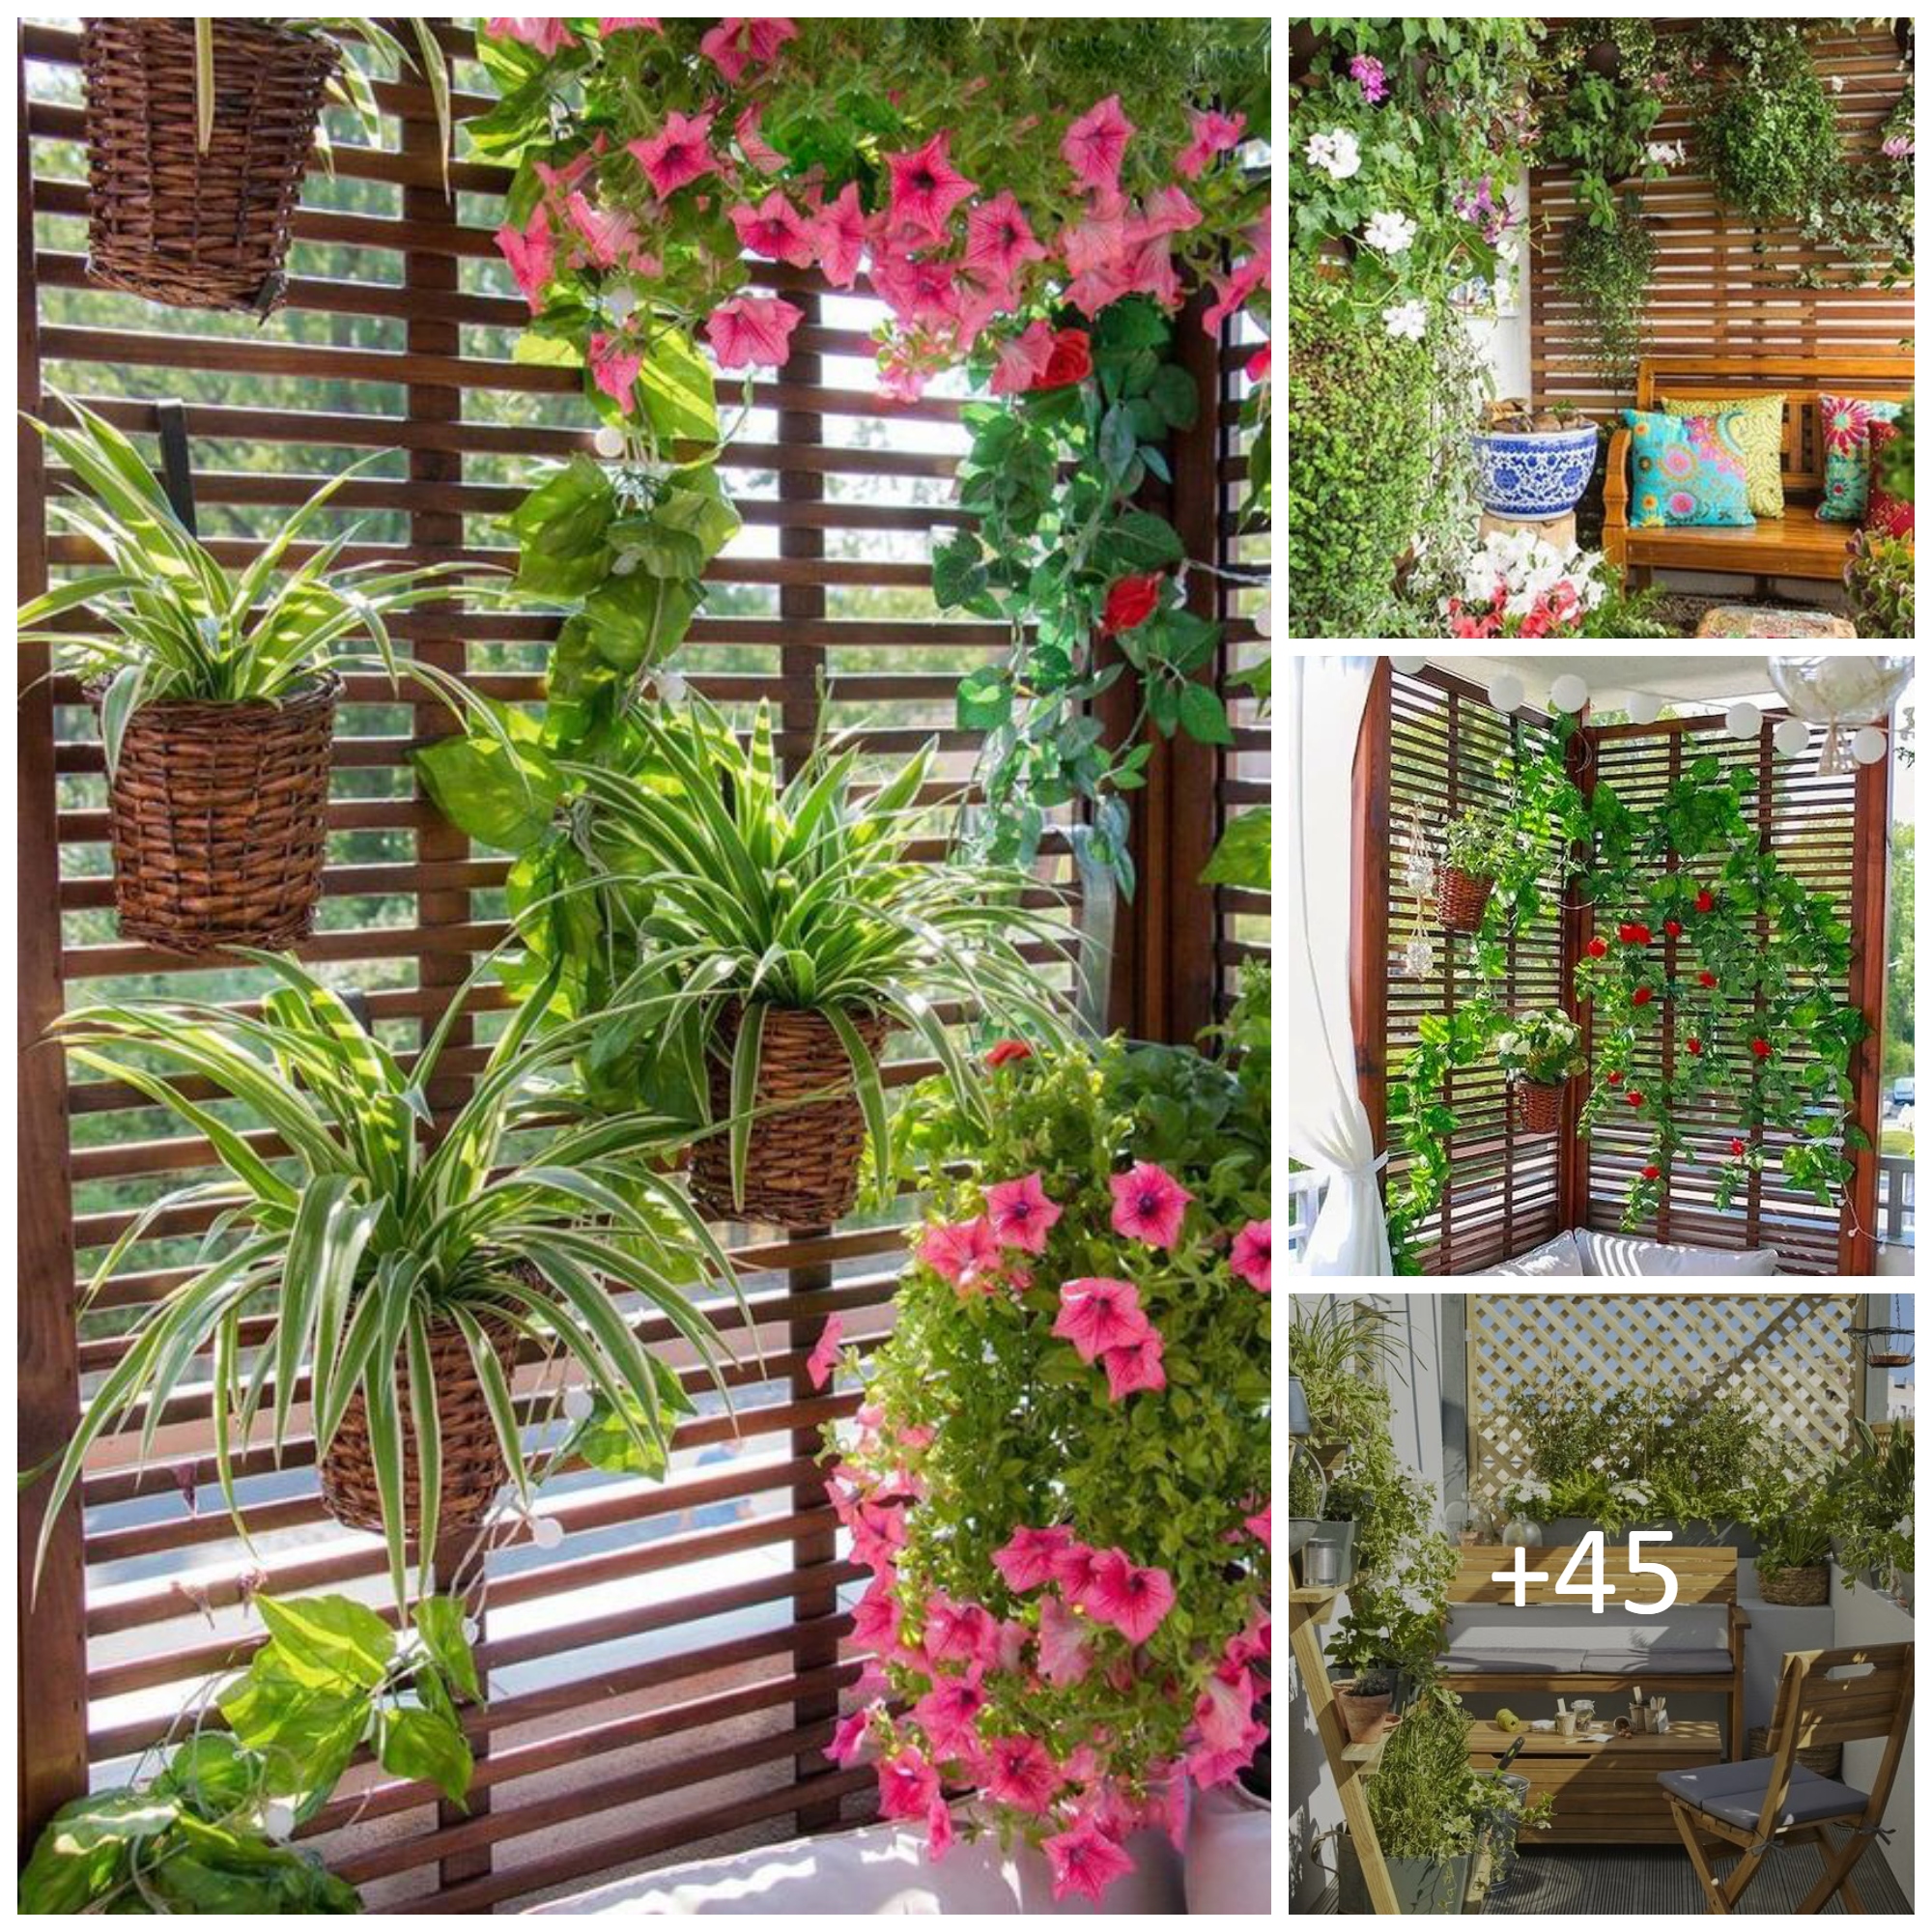 Hanging balcony plants and blooming flowers for a spectacular exterior